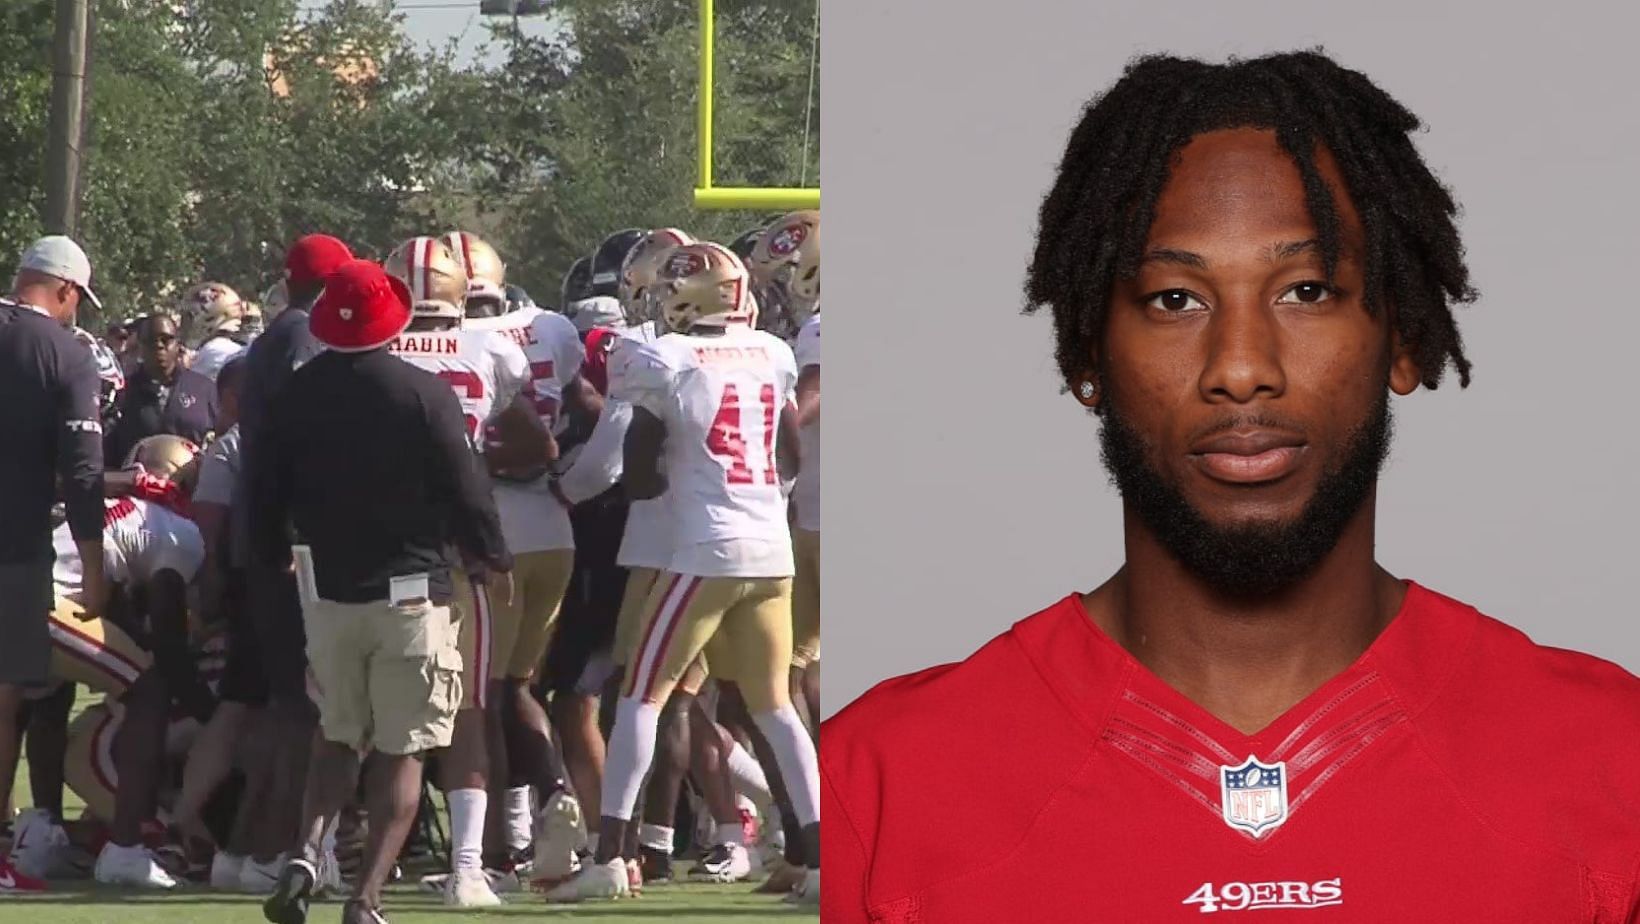 The 49ers had to deal with a fight during camp practices